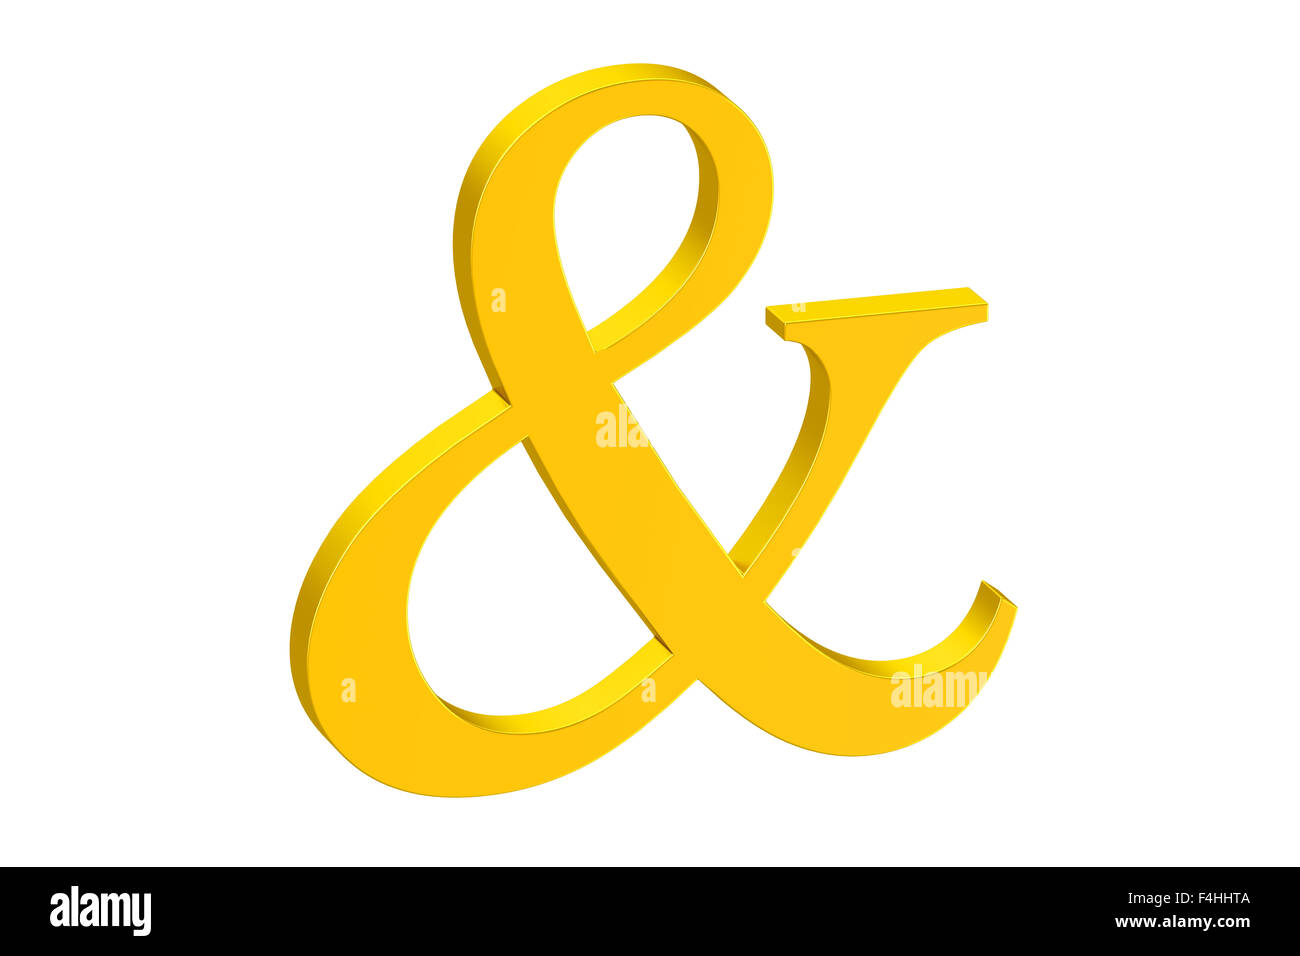 2,264 Ampersand Symbol Red Images, Stock Photos, 3D objects